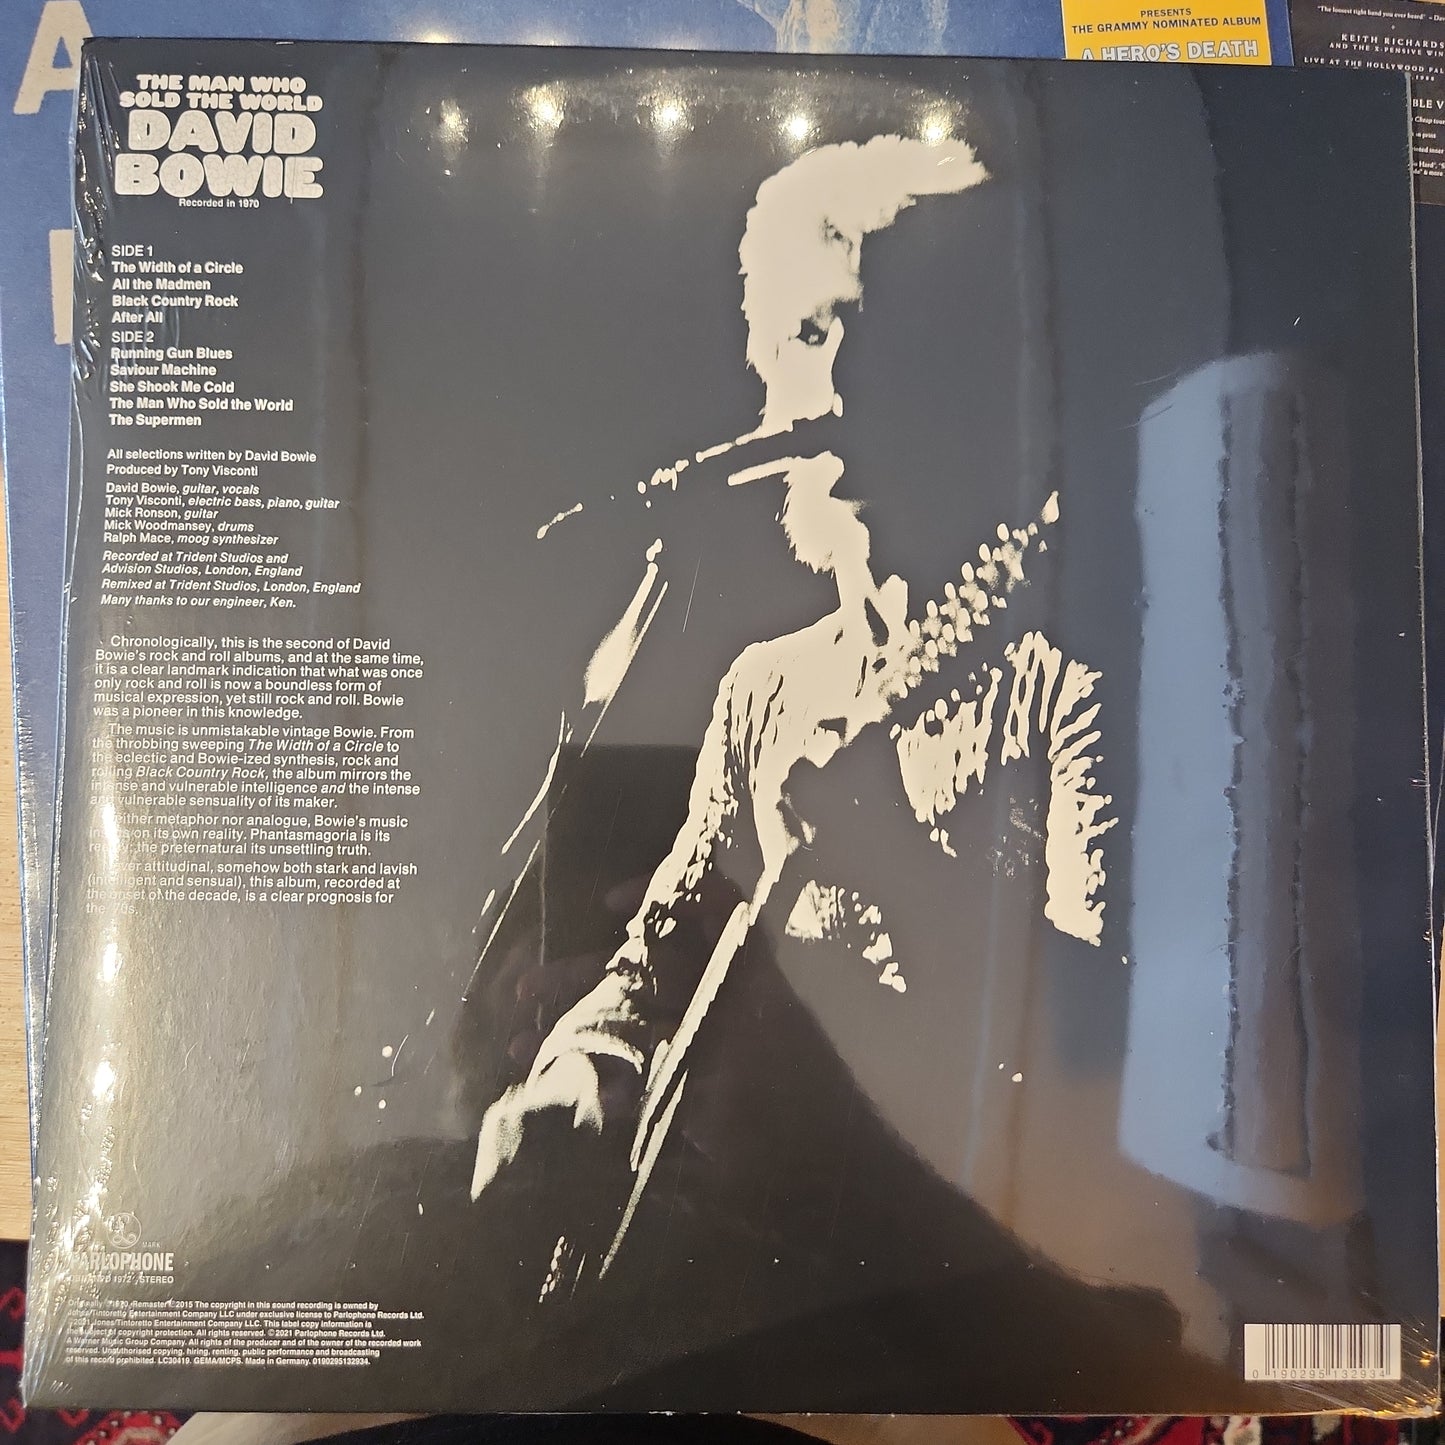 David Bowie - The Man who sold the world - Picture Disc Vinyl LP